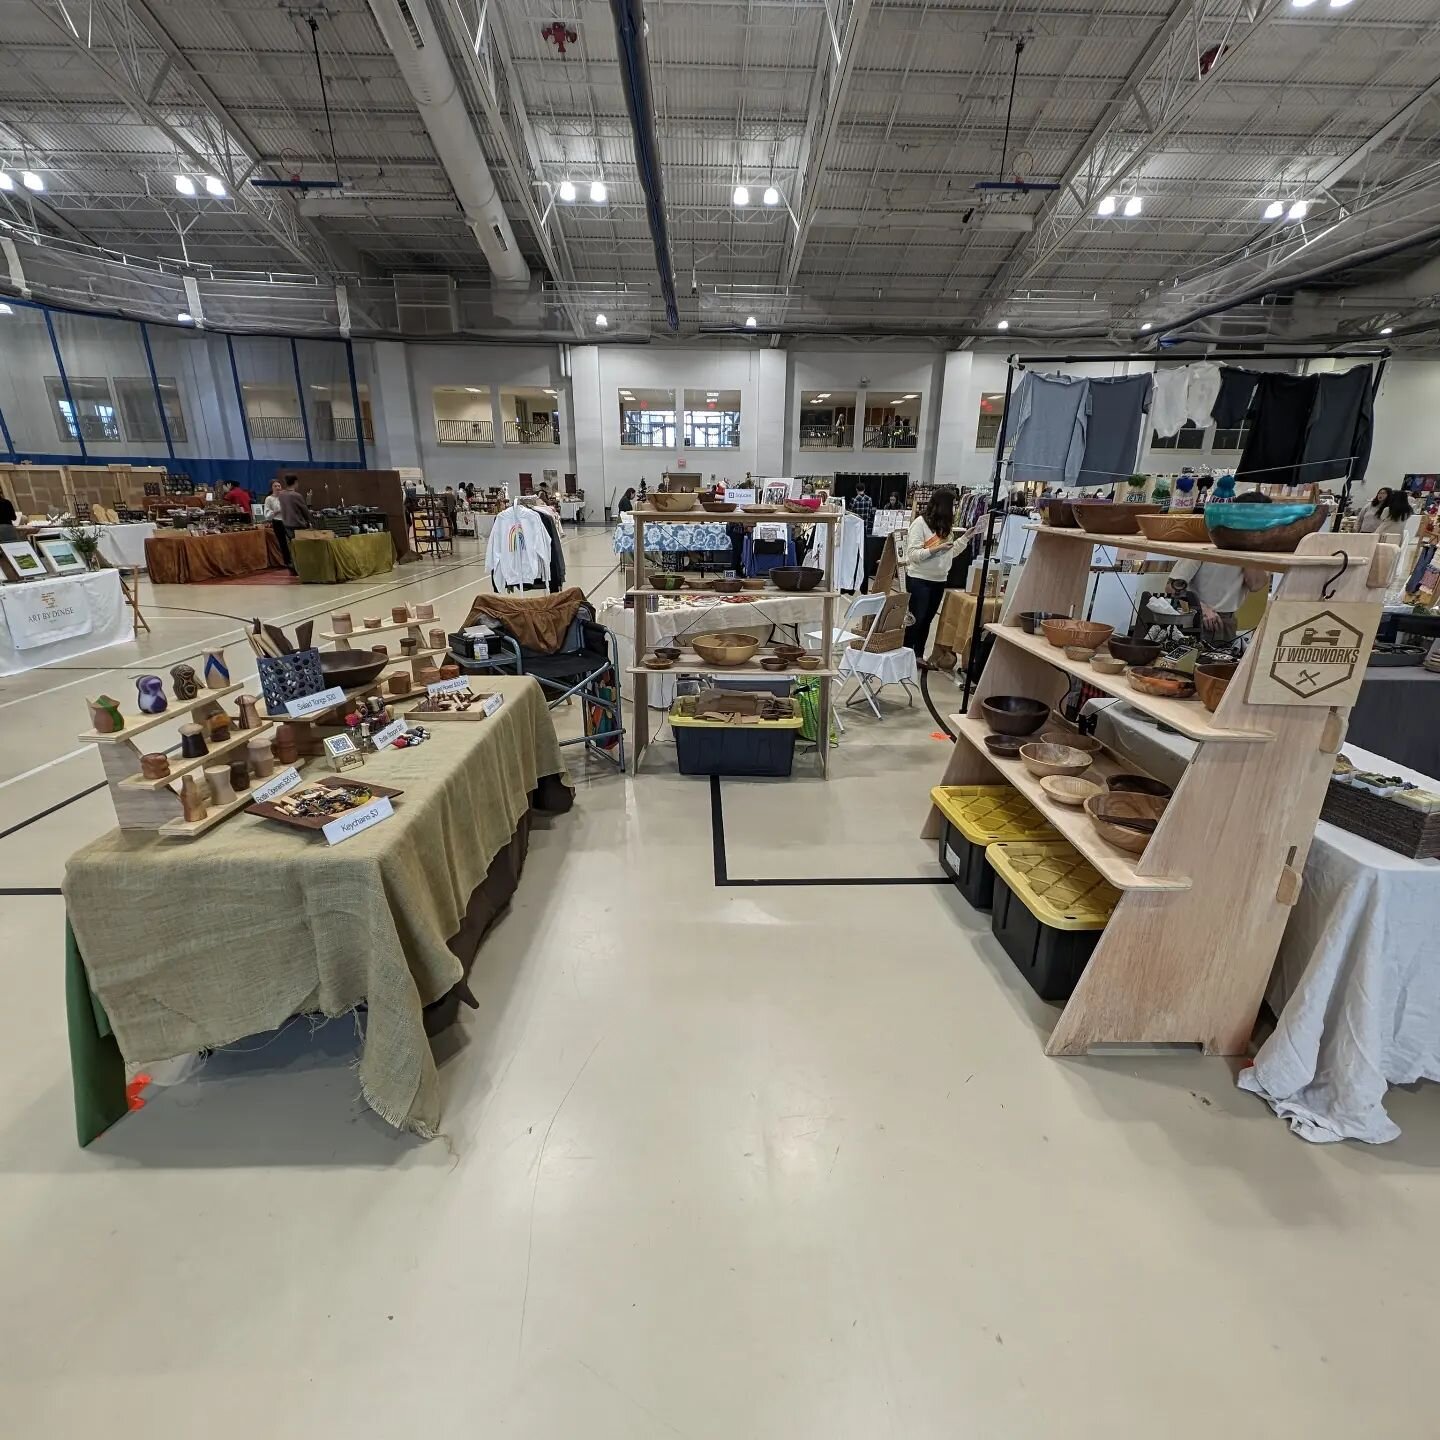 Clover Market Holiday Market

Hey everyone, we're all set up for day one. There are lots of amazing vendors and some really cool stuff here at the @clovermarket market at @westtownschool. General admission doors open from 10-4 today and tomorrow. Hop